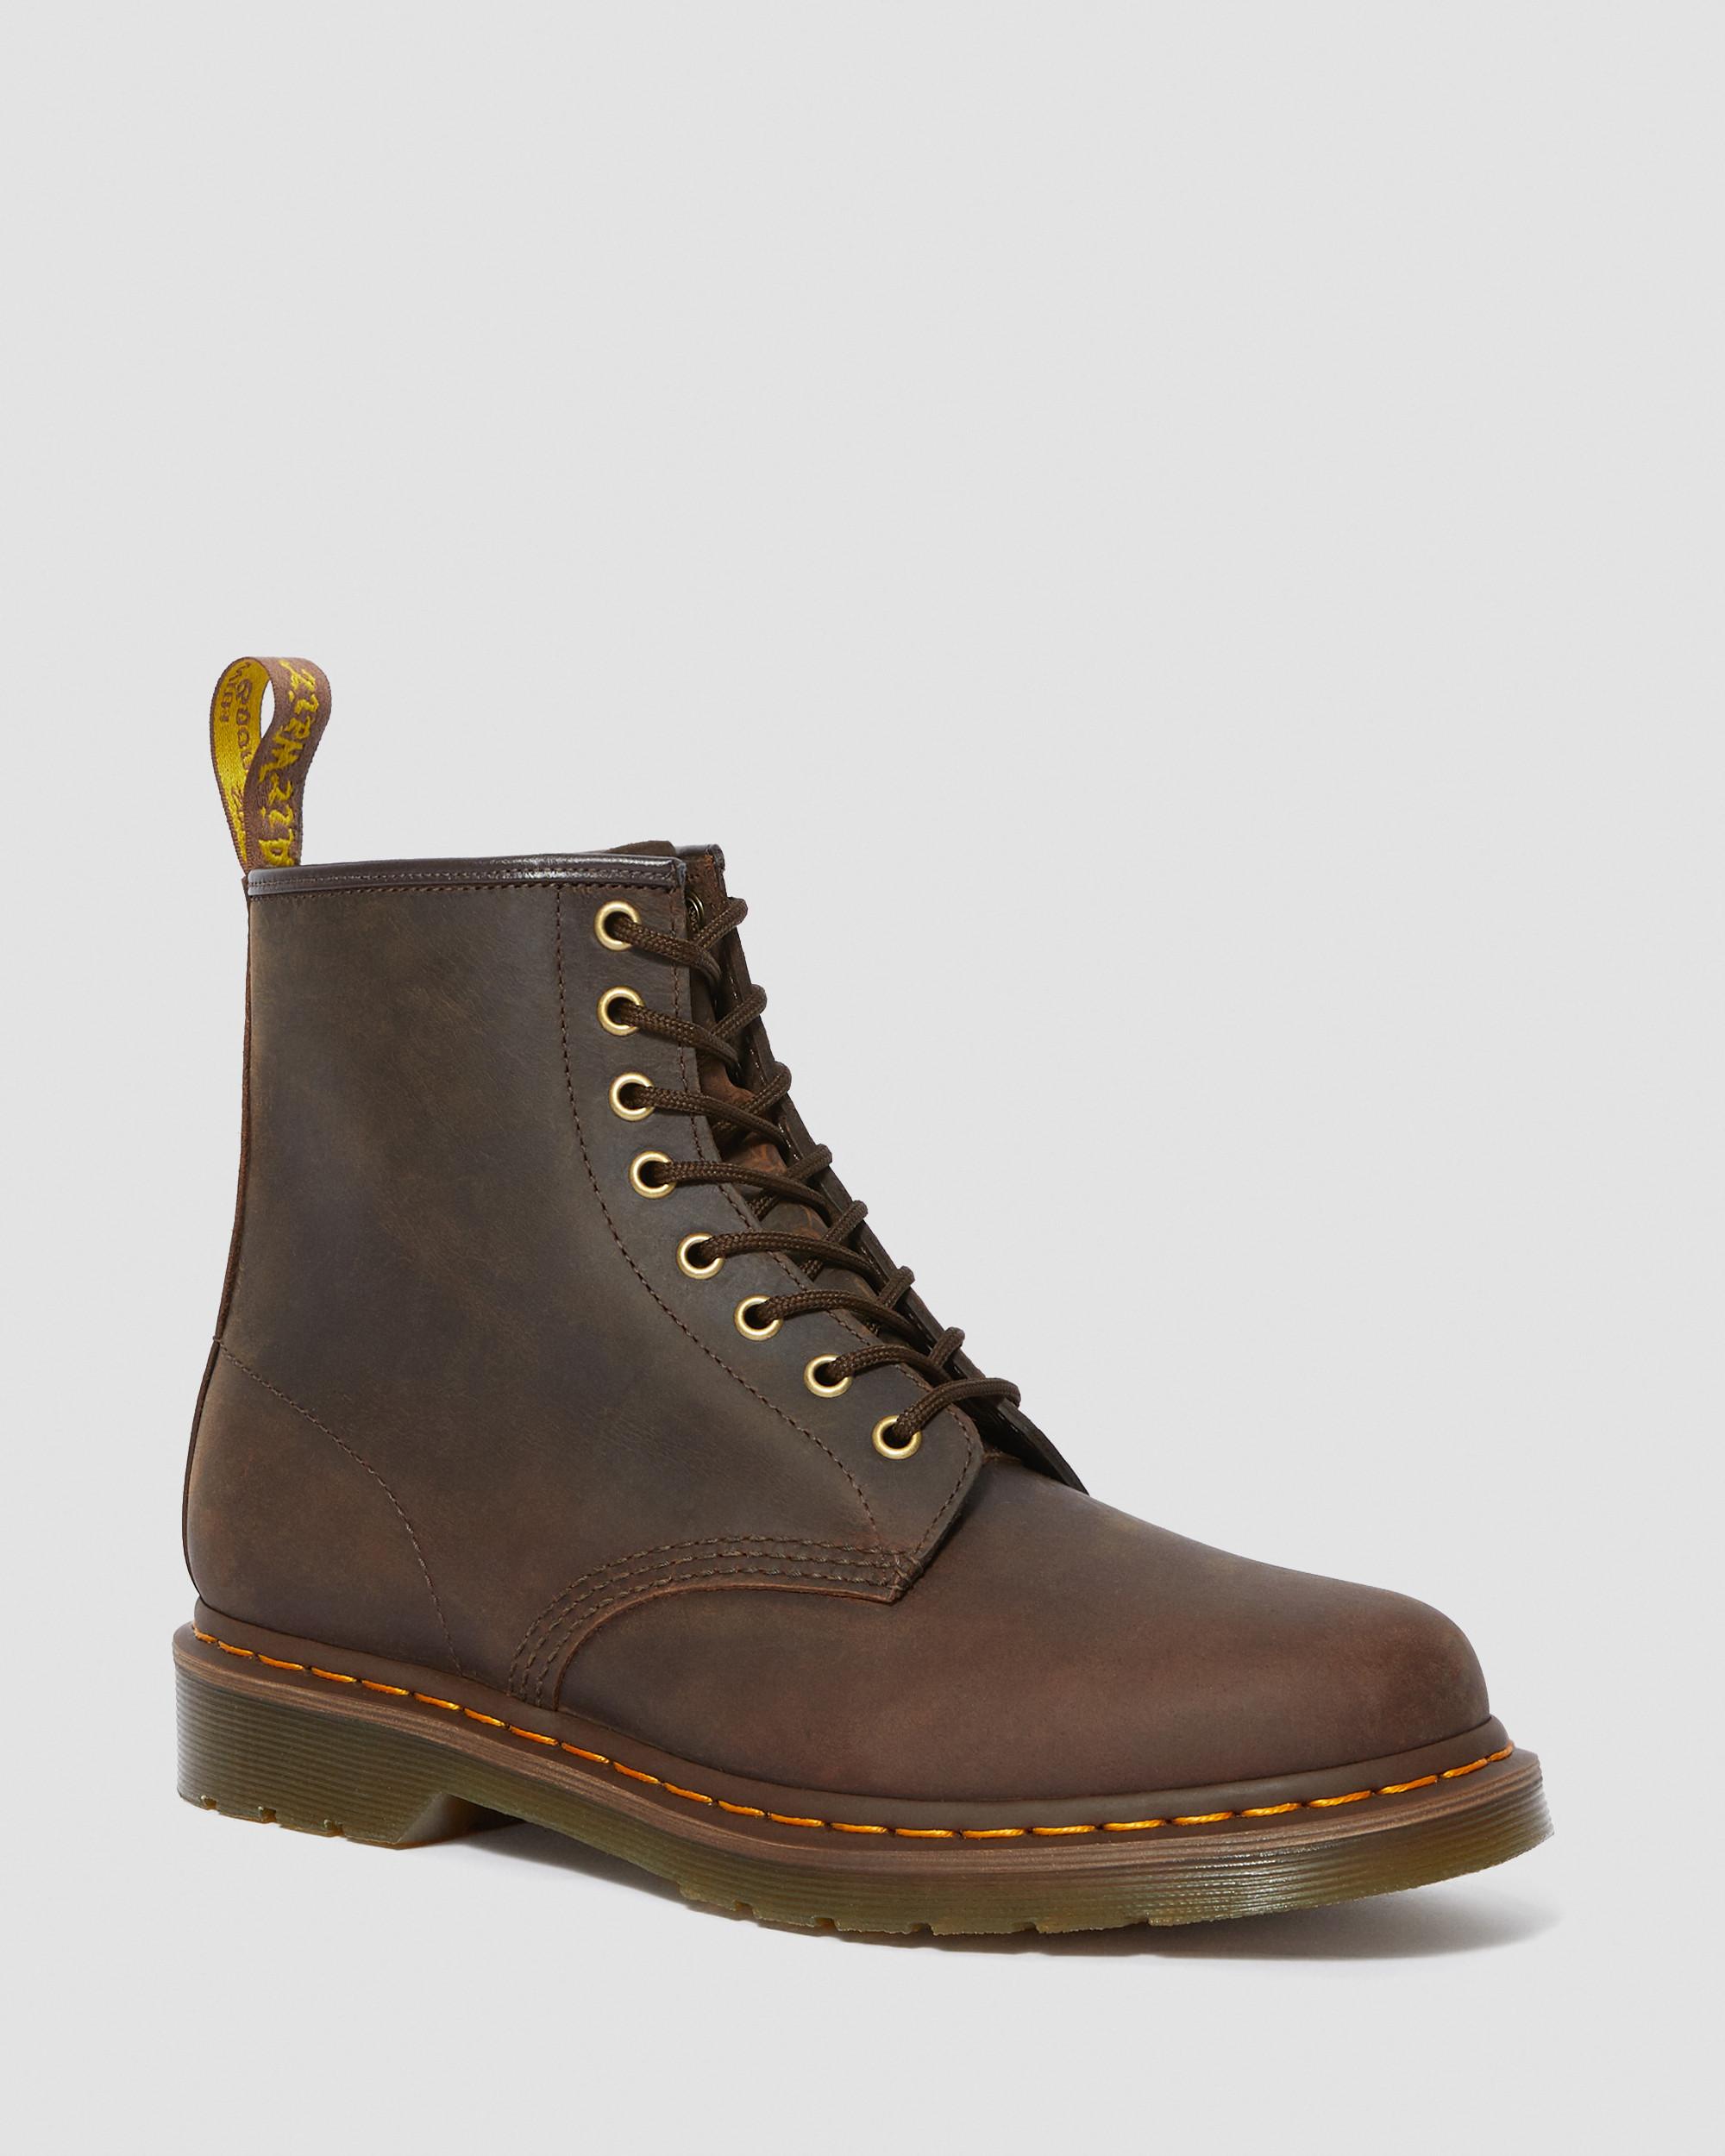 1460 Crazy Horse Leather Lace Up Boots1460 Crazy Horse Leather Lace Up Boots Dr. Martens